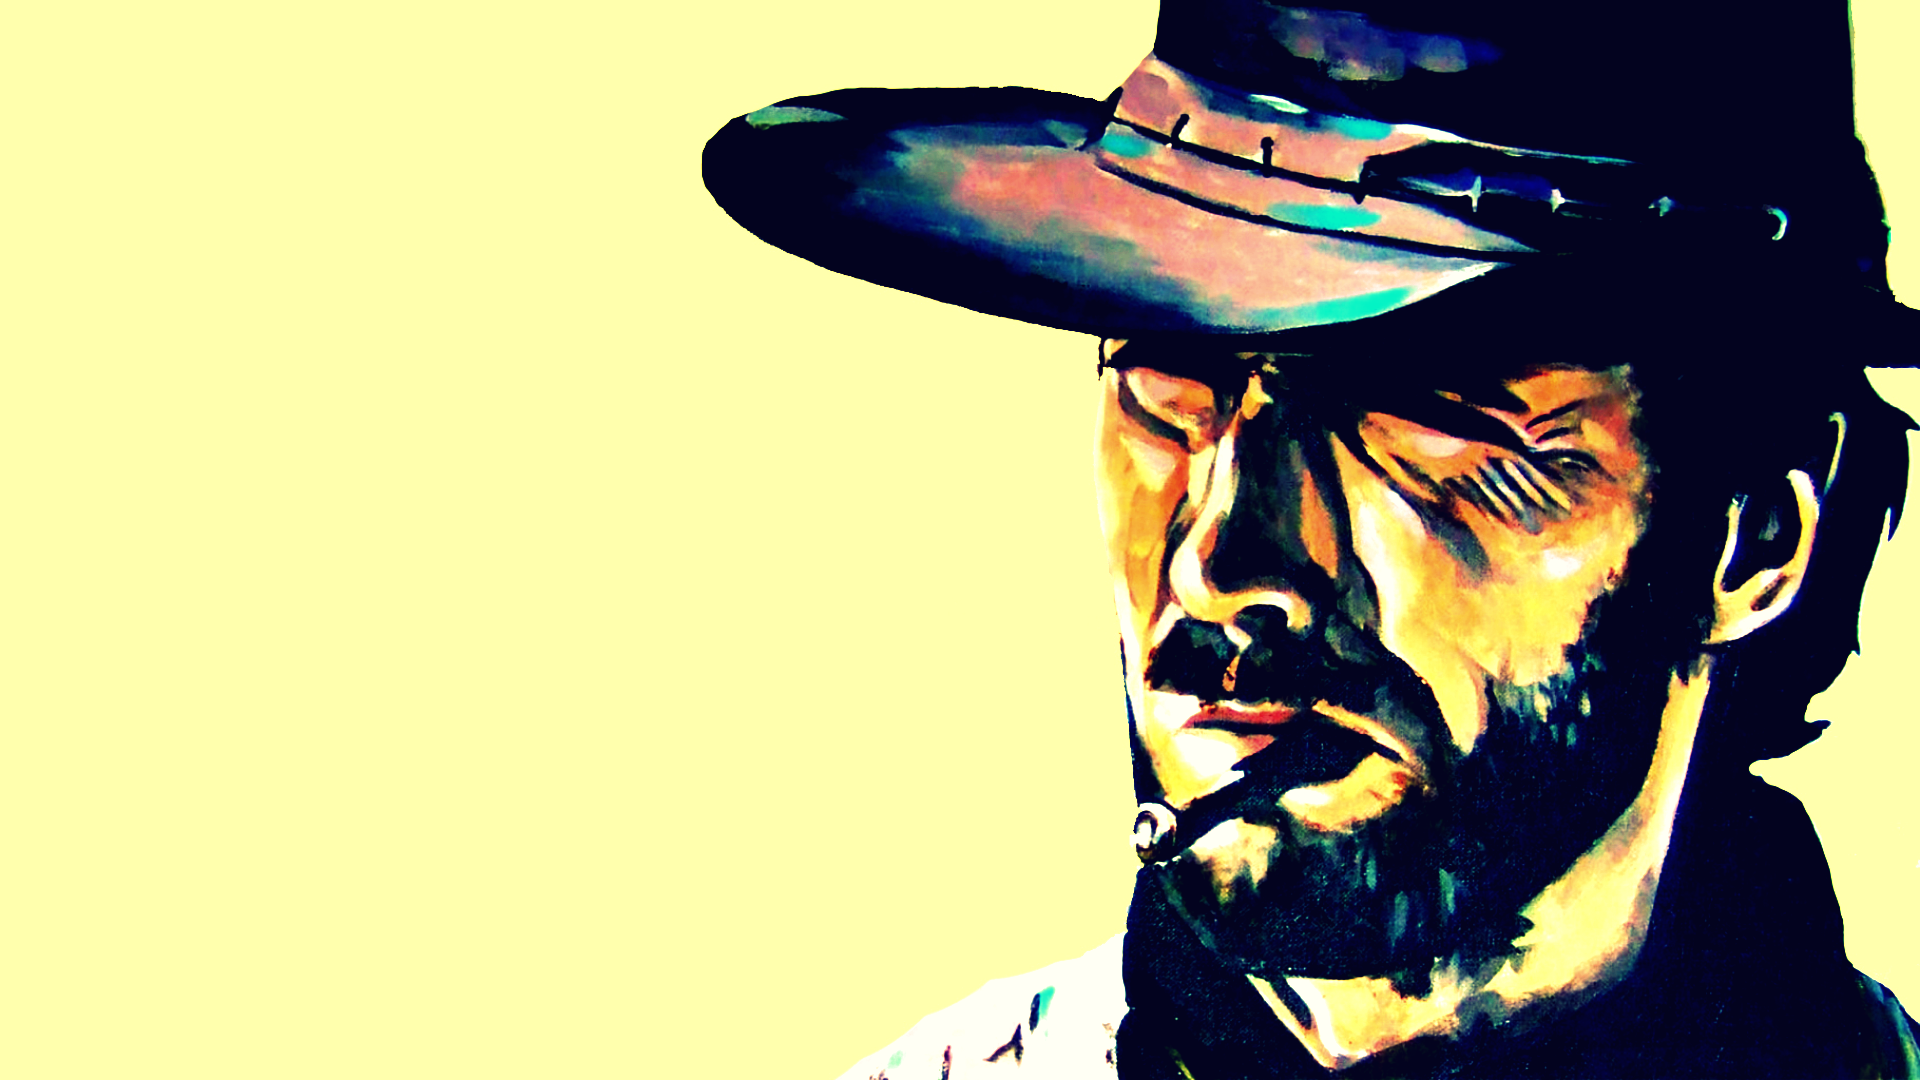 General 1920x1080 Clint Eastwood artwork actor cigars men movies western simple background